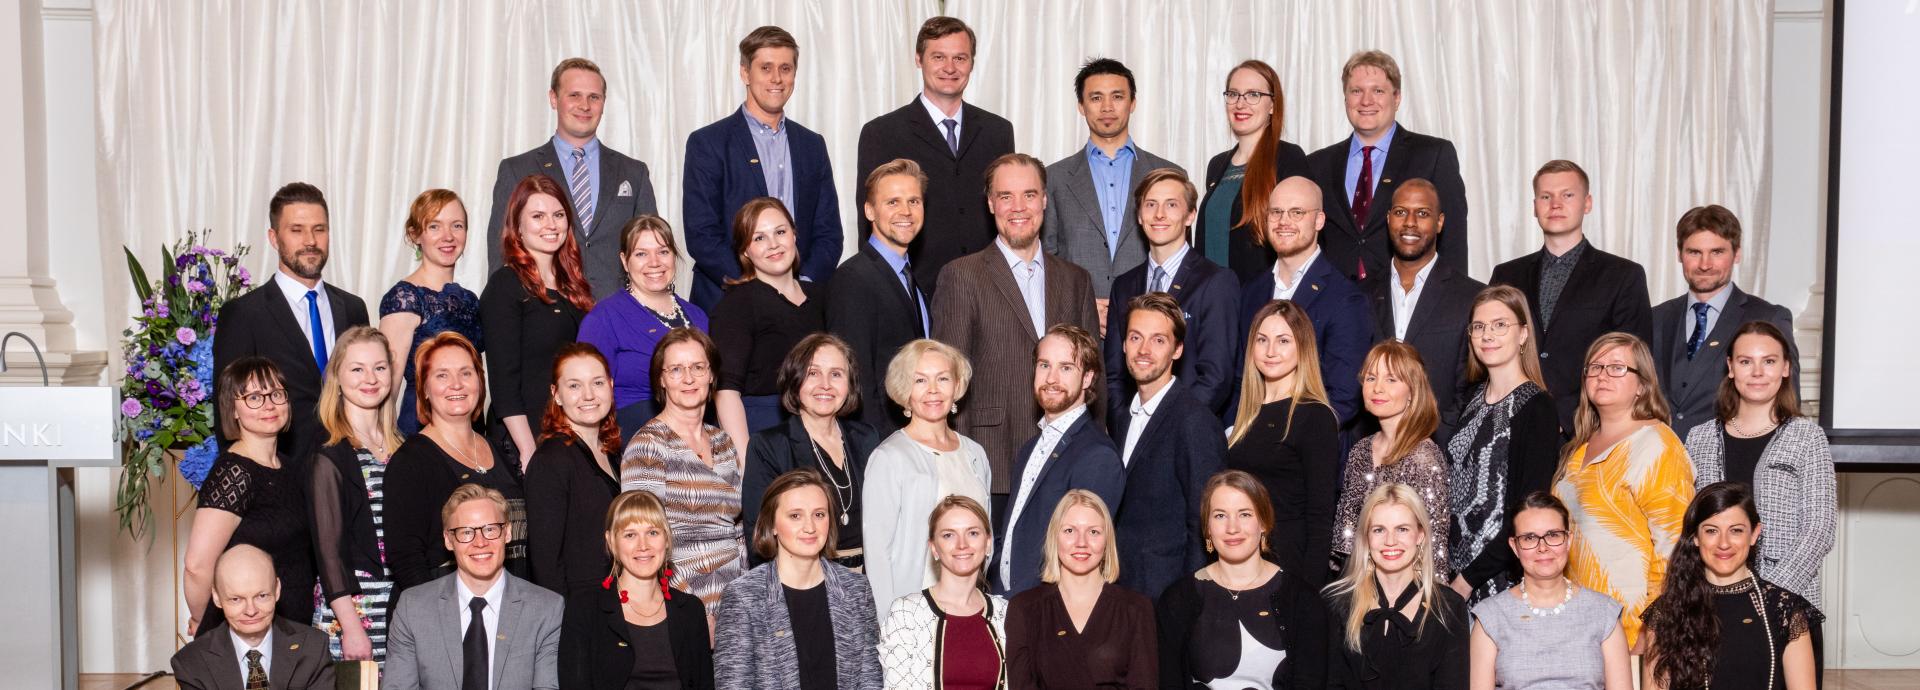 Group photo of the Finnish Fulbright grantees going to the U.S. in 2019-2020